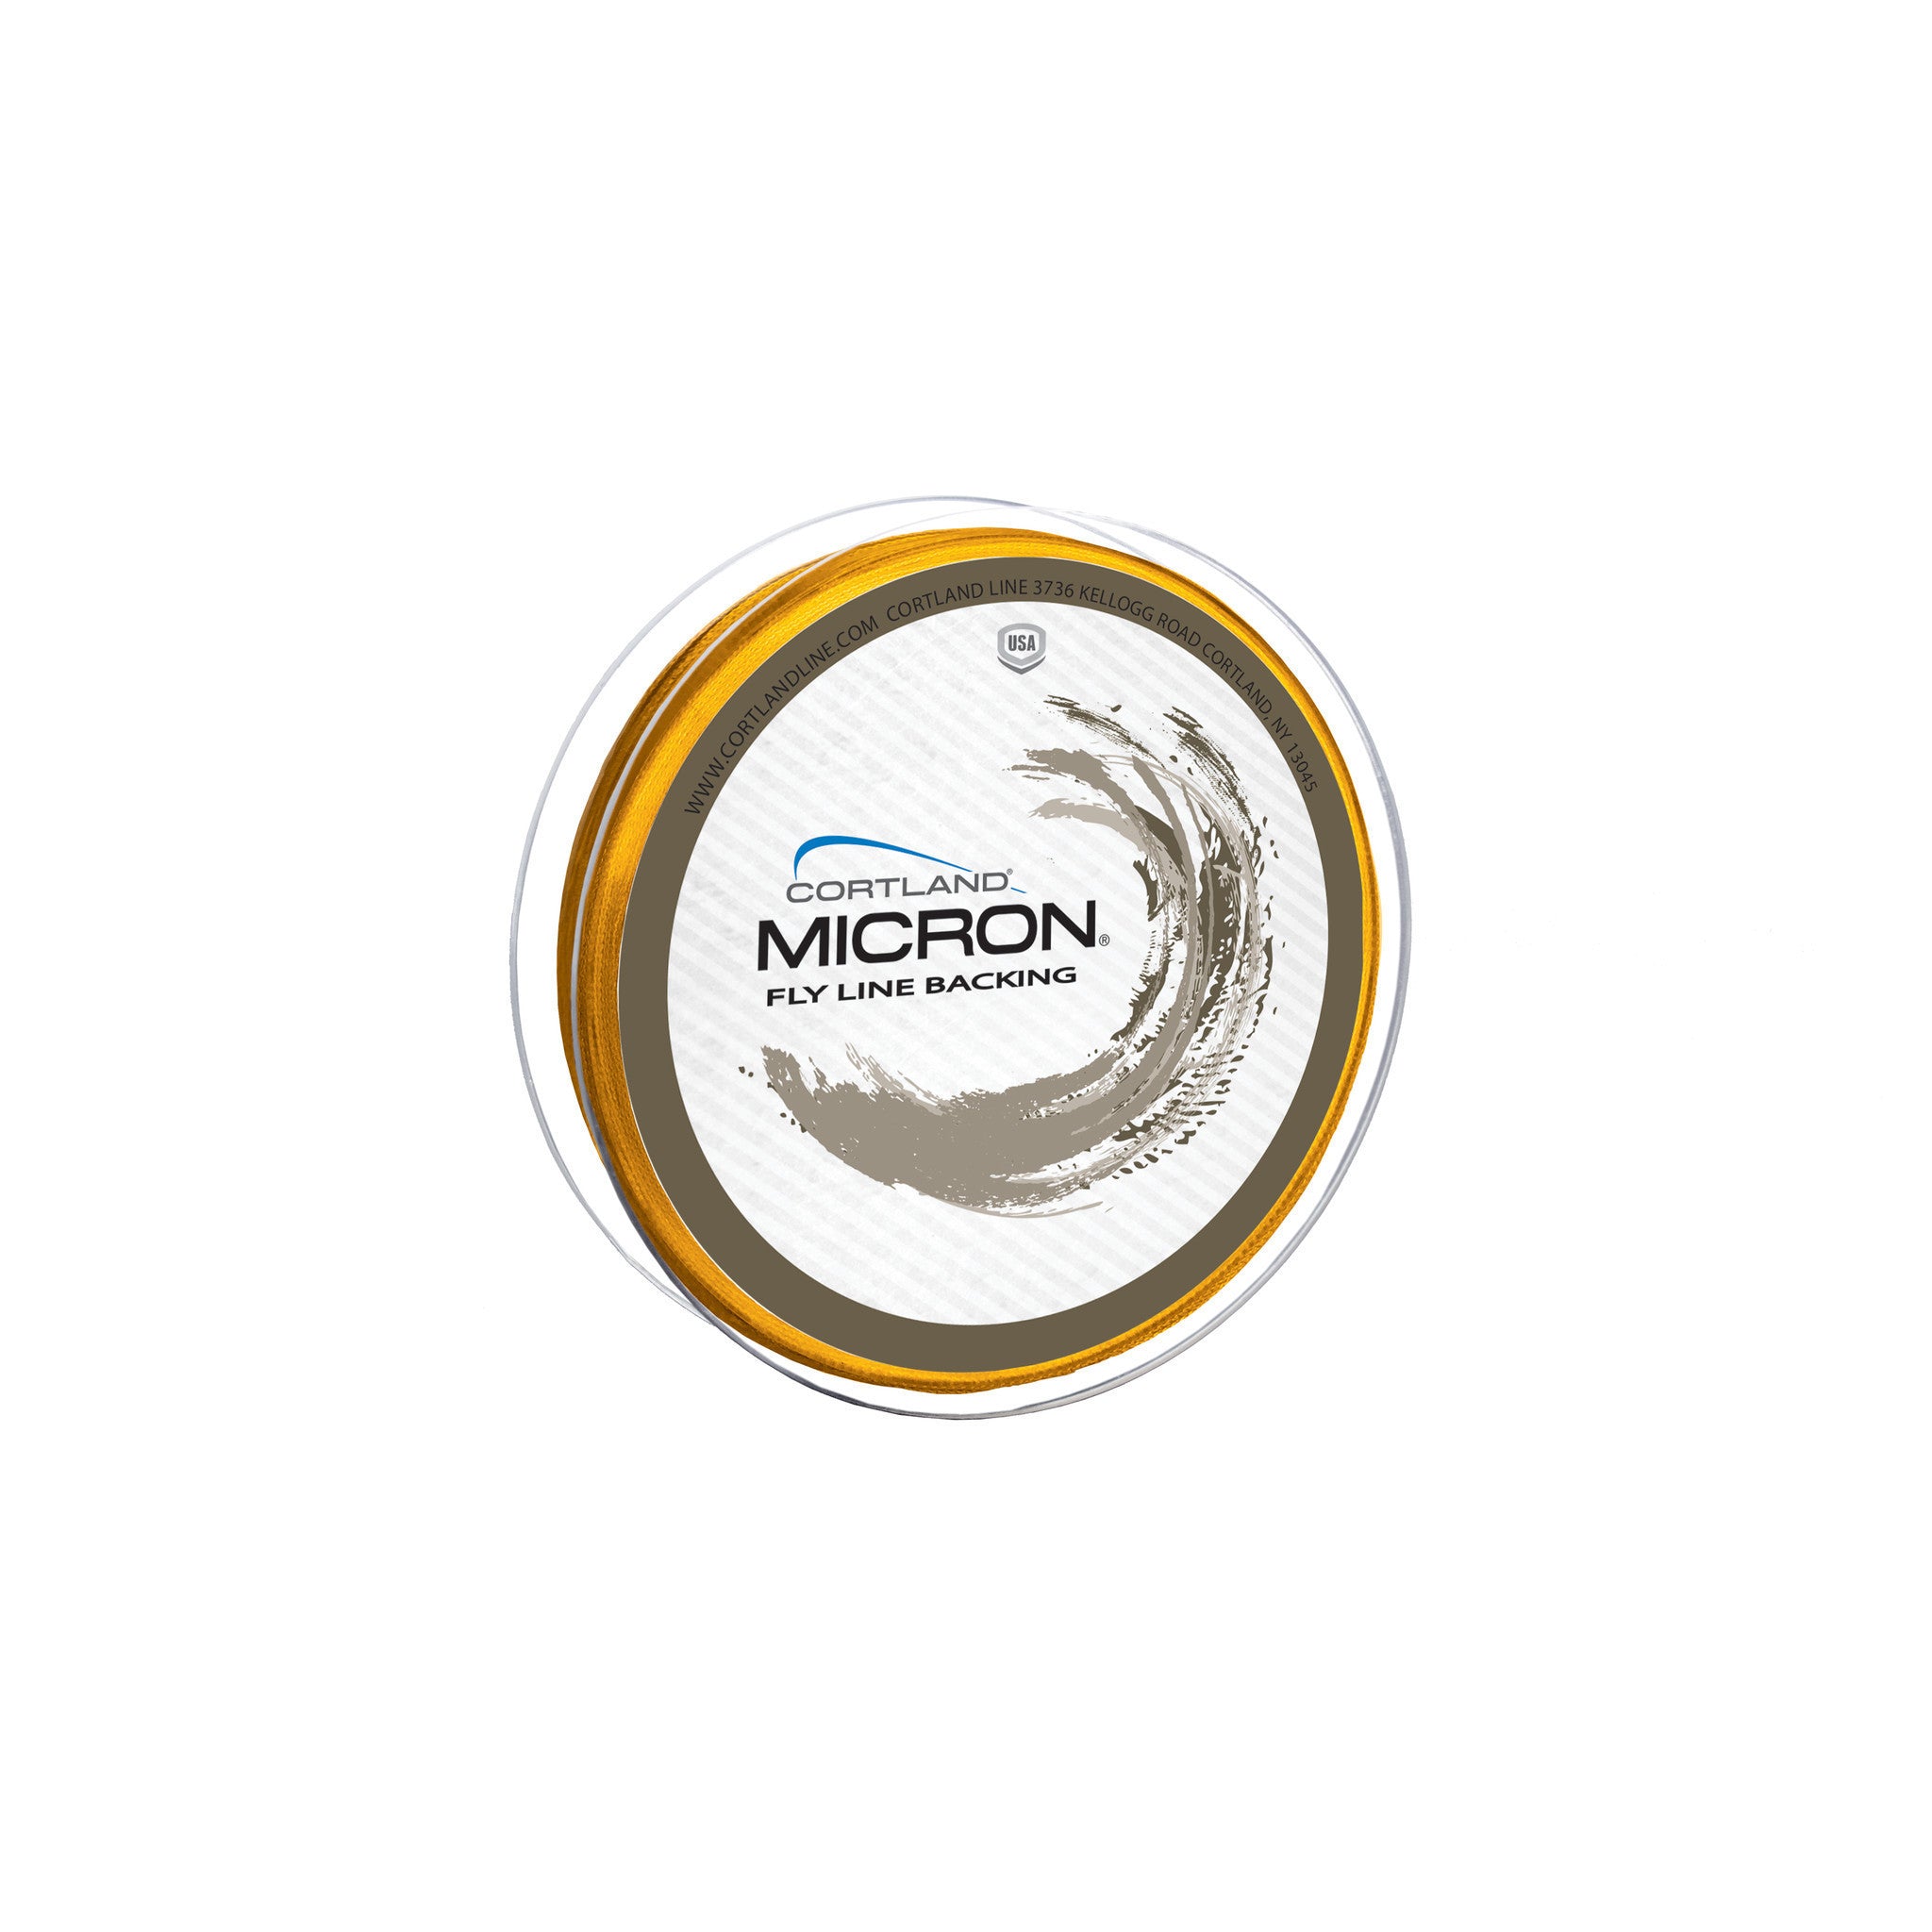 MICRON FLY LINE BACKING - The TroutFitter Fly Shop 